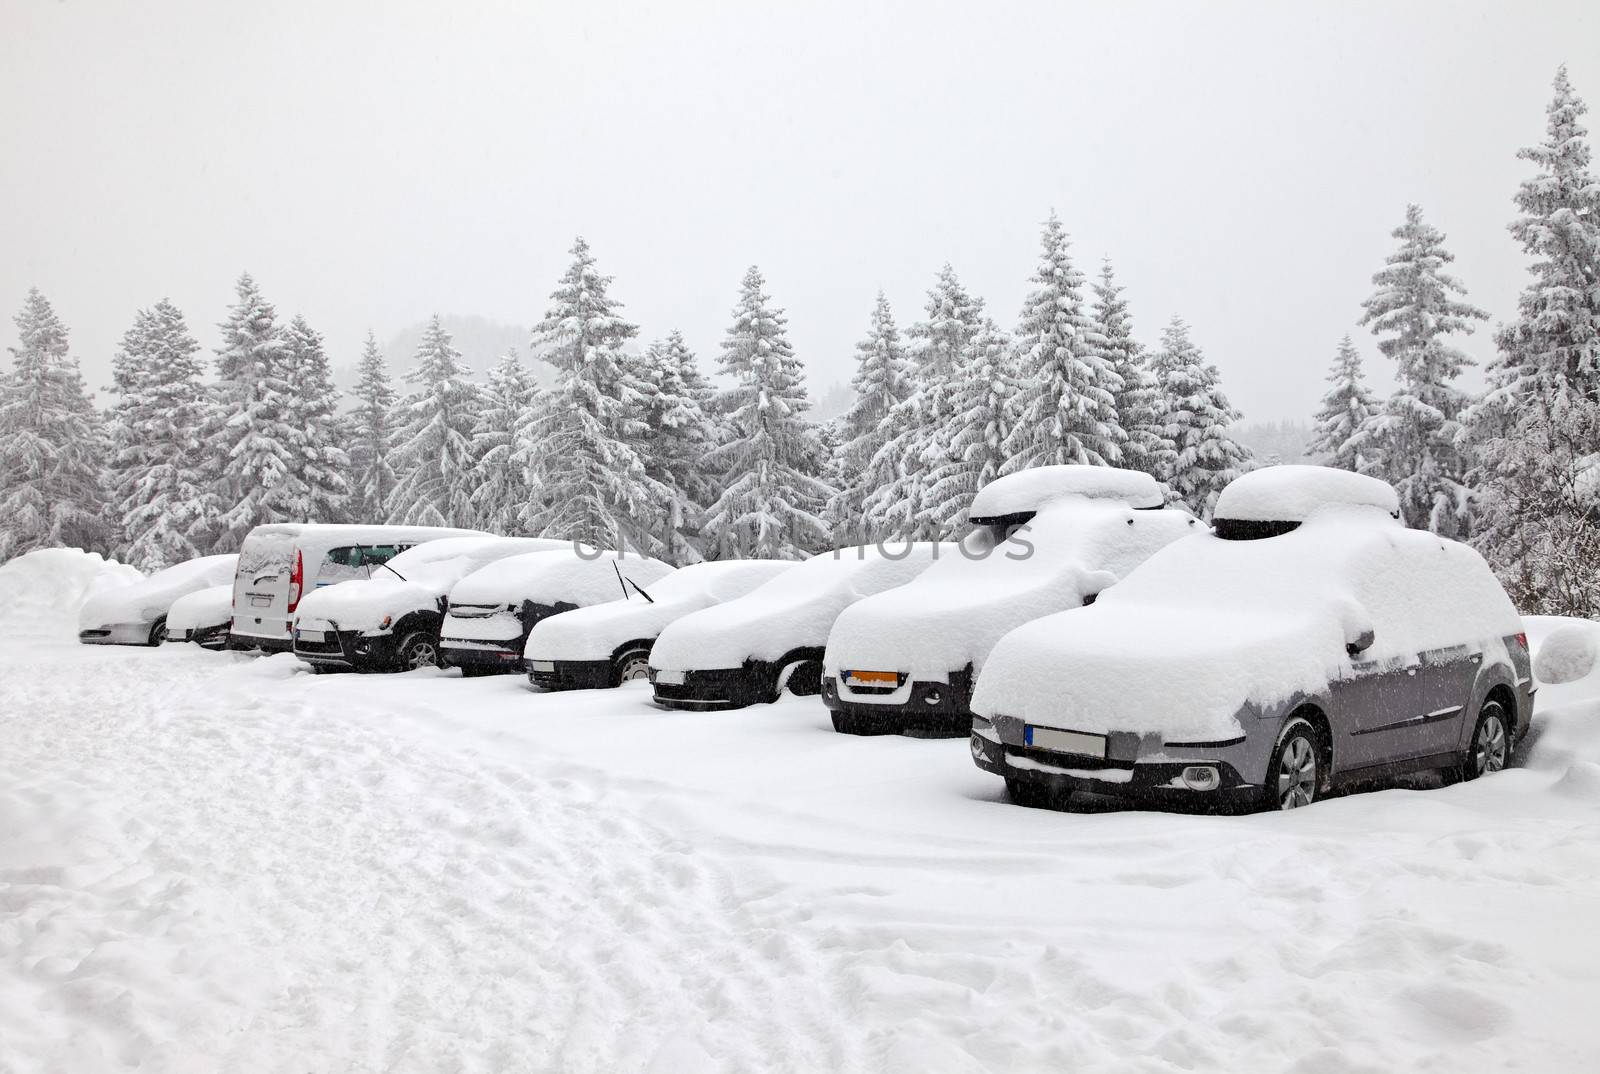 Parking cars covered by a lot of snow